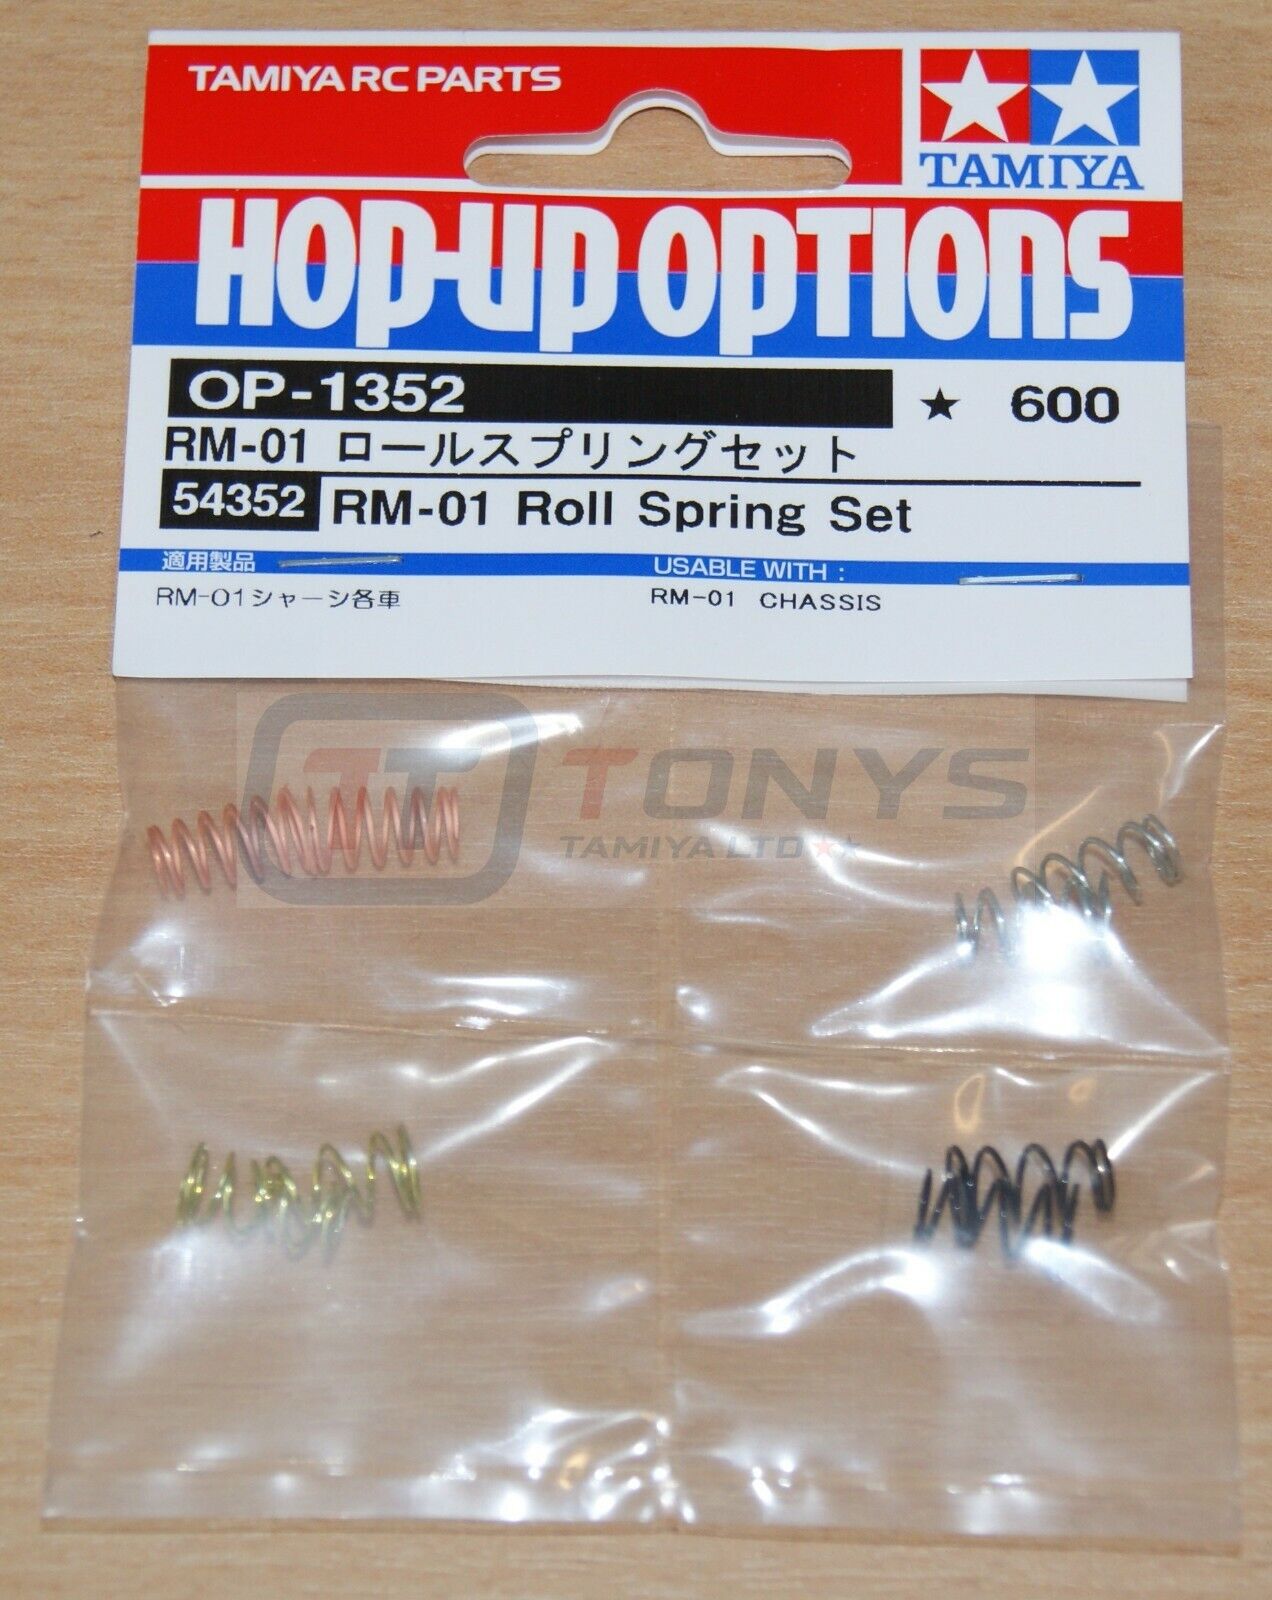 Tamiya 54352 RC RM-01 Roll Spring Set For RM01/F104 Ver.II Hop Up Parts OP1352